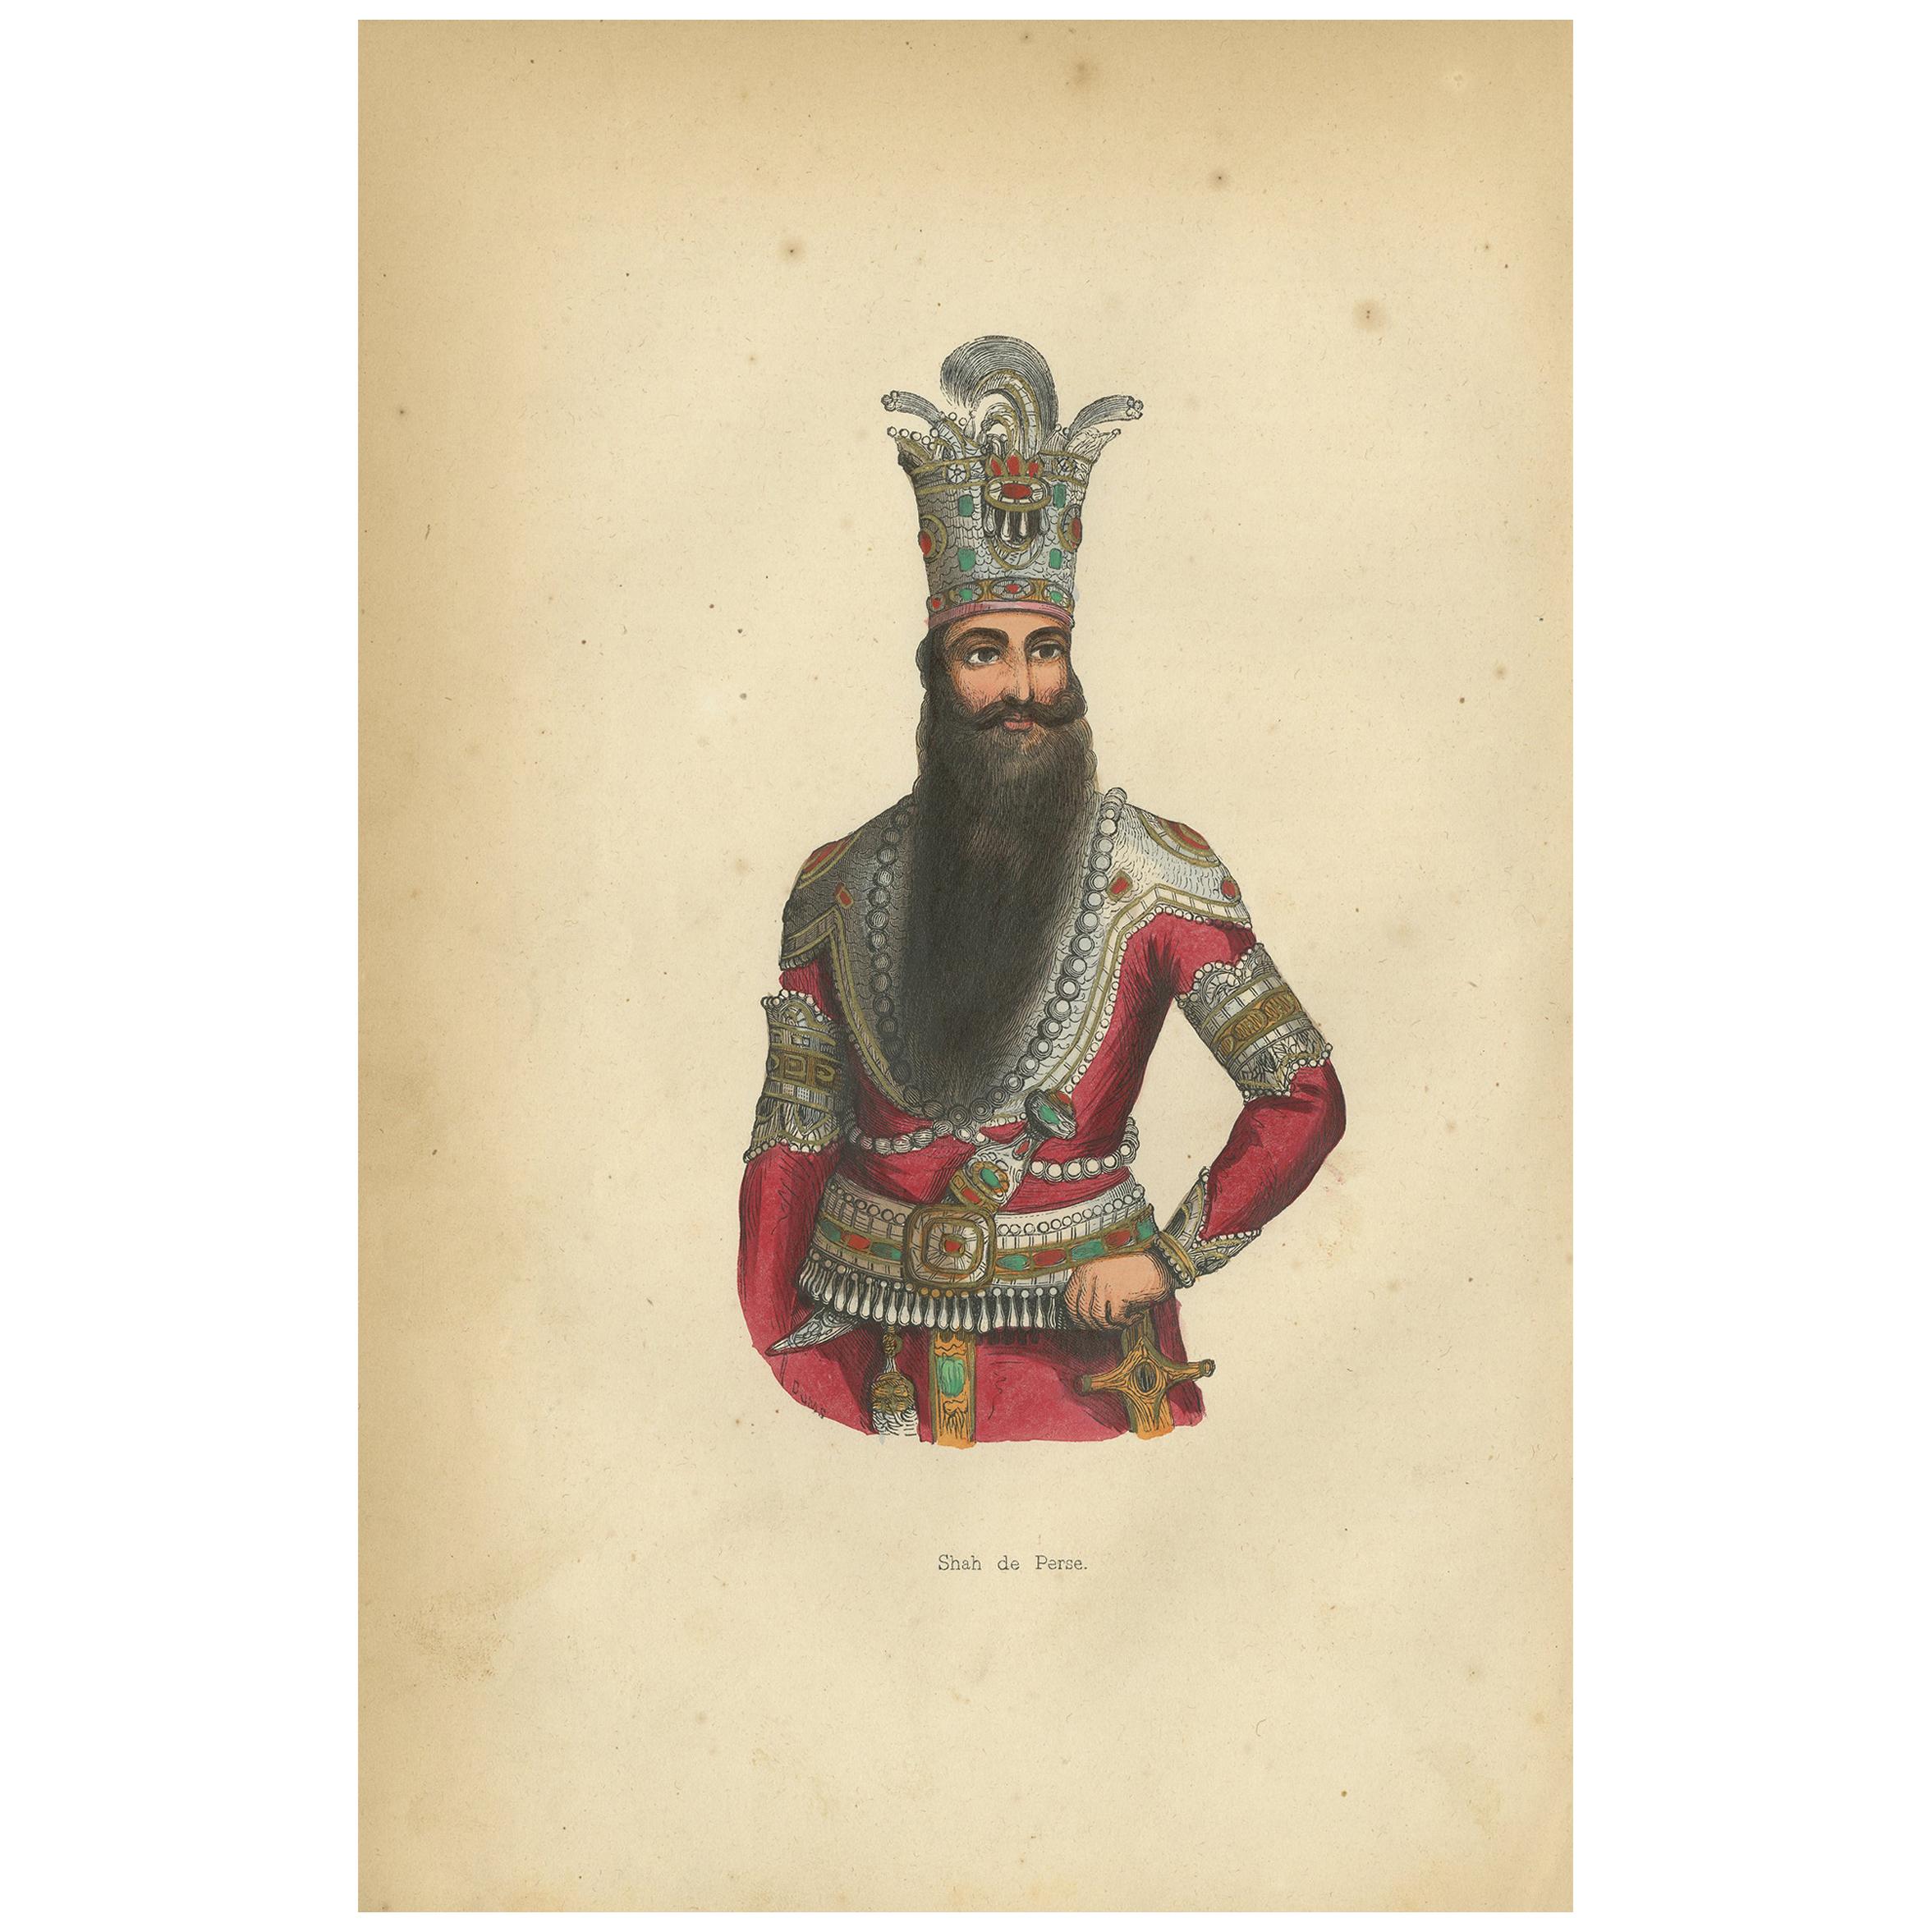 Antique Print of a Shah of Persia by Wahlen, 1843